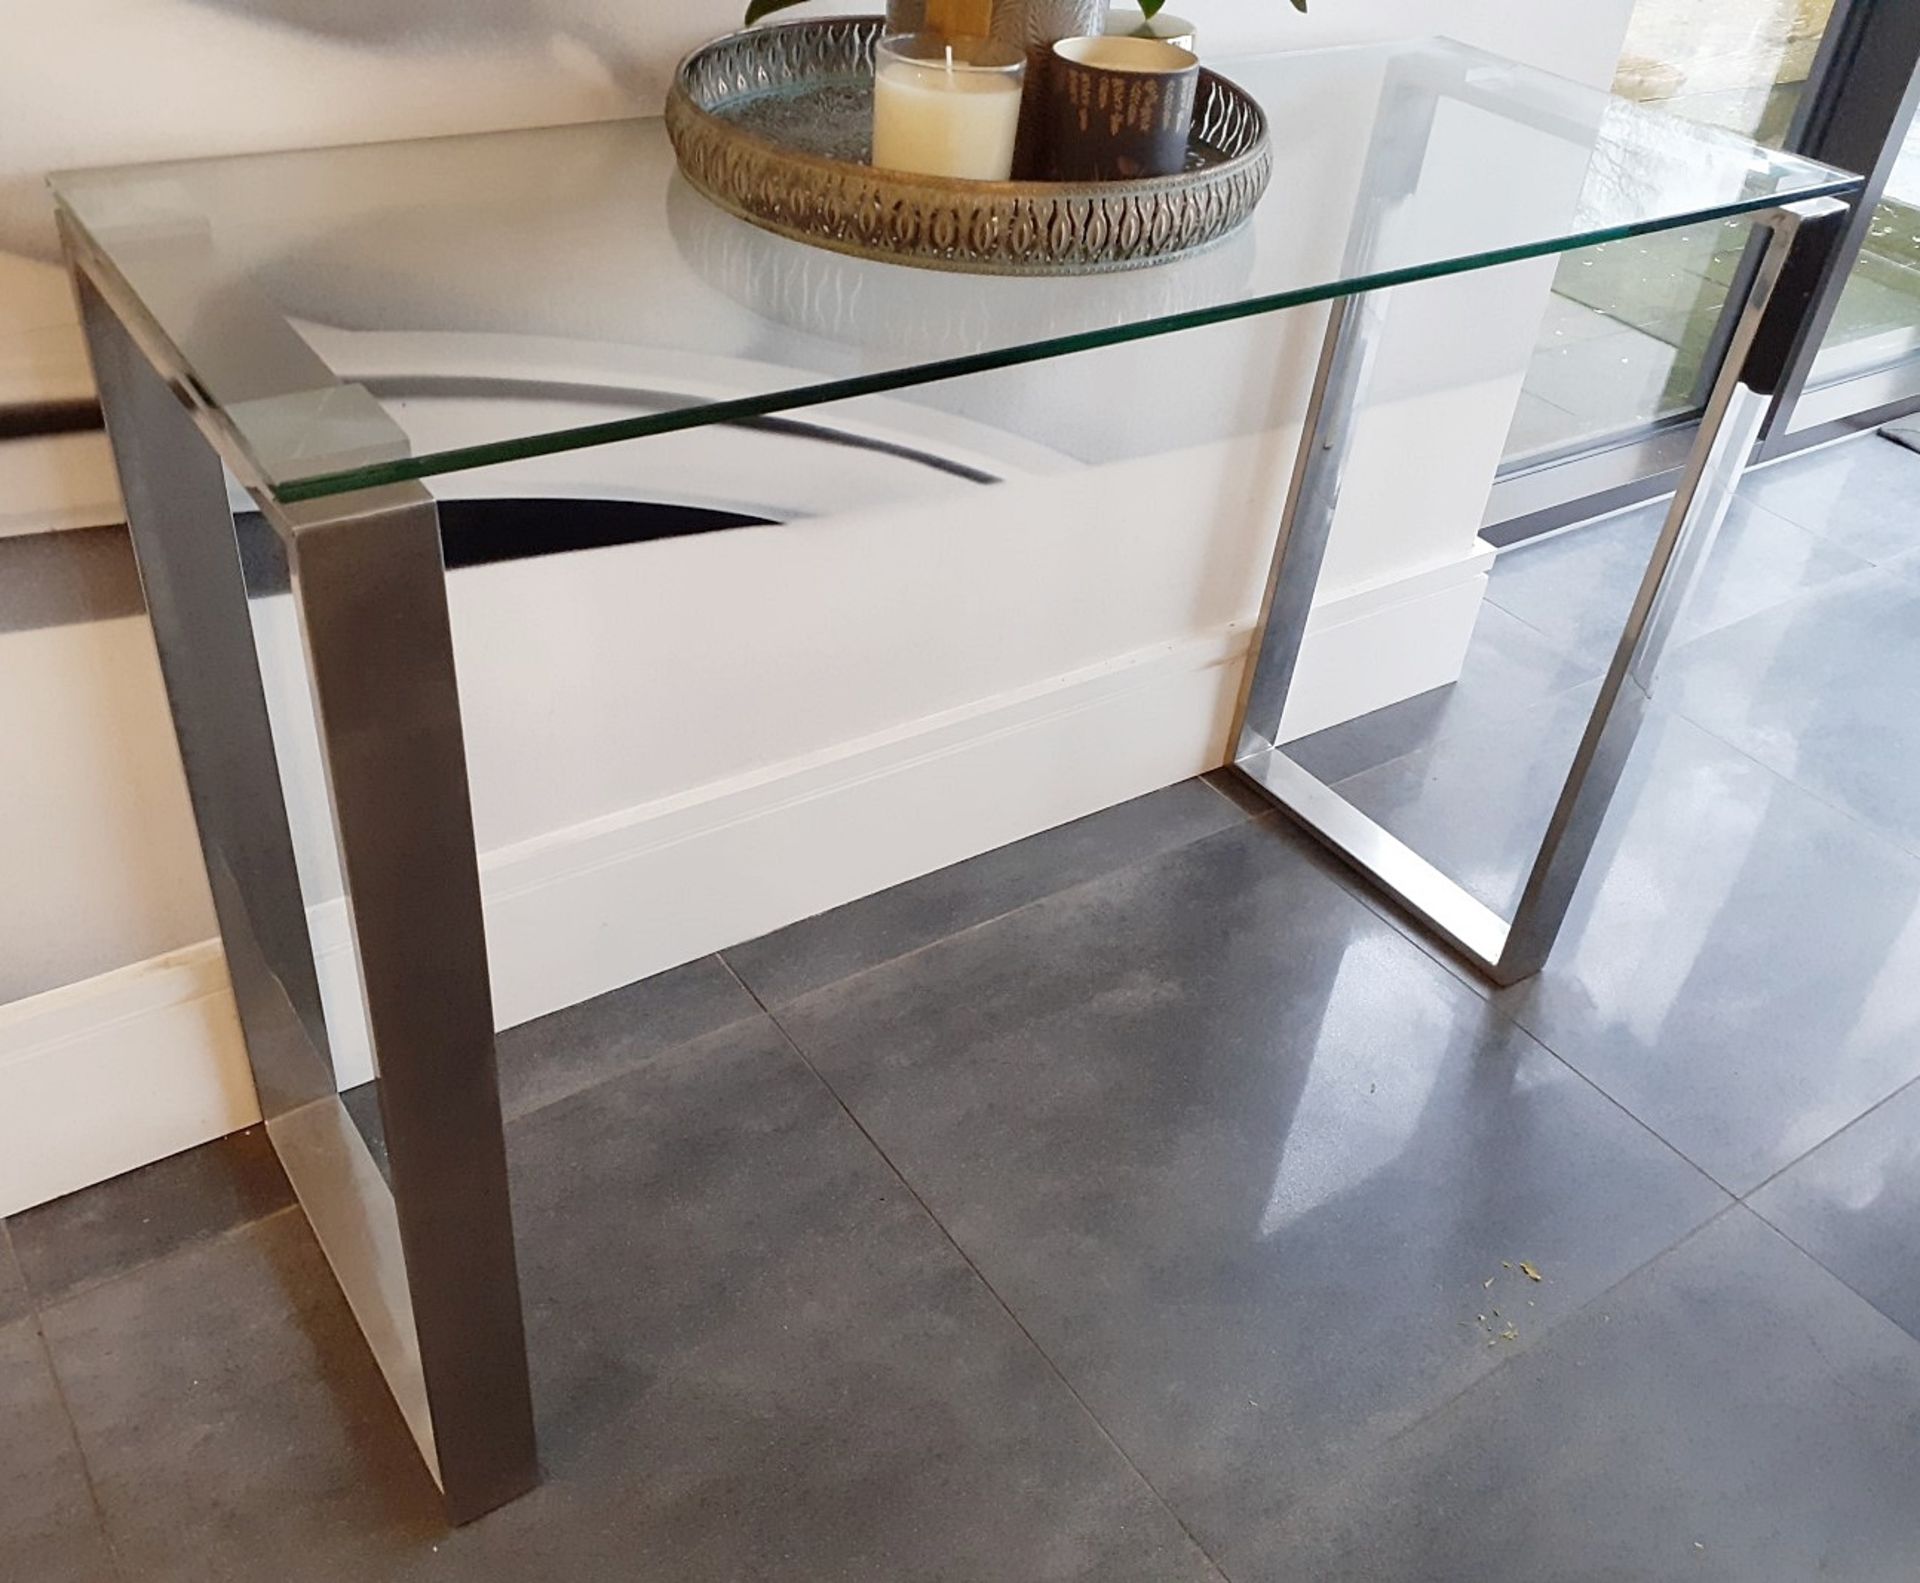 1 x Glass Topped Console Table With A Sturdy Metal Frame - Dimensions: 110 x 40 x H74cm